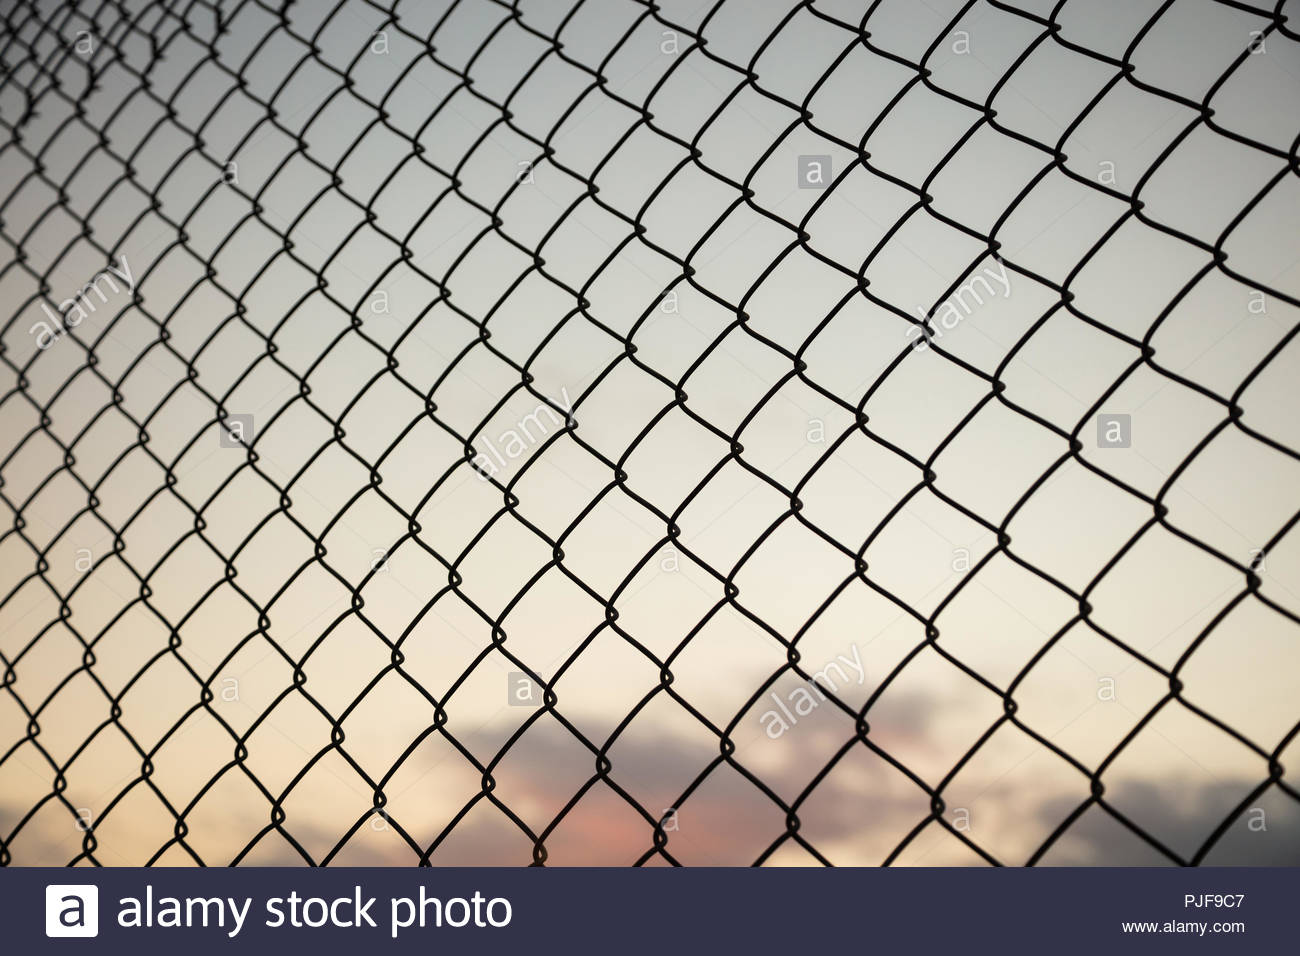 Sky Through Wire Mesh Fence Blur Background Close Up Of